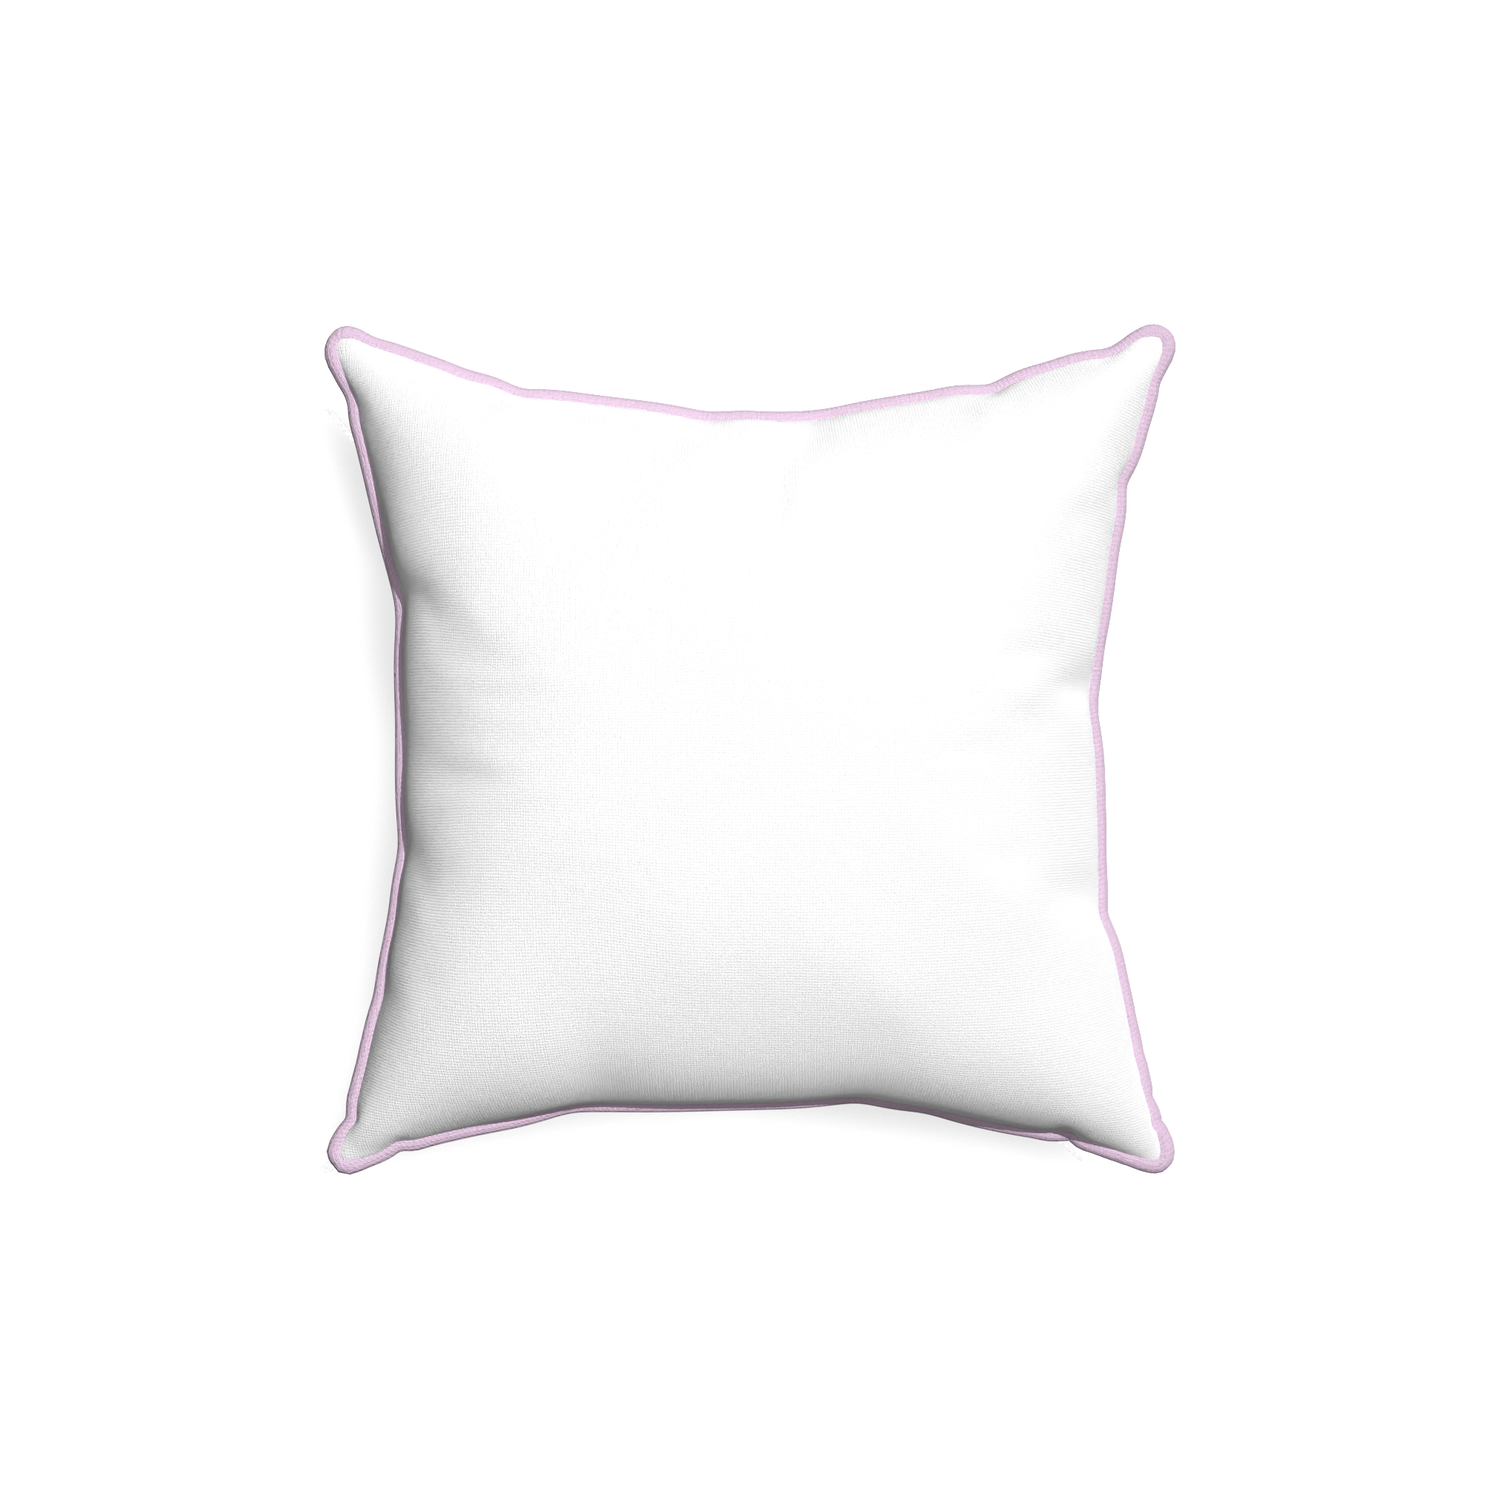 18-square snow custom white cottonpillow with l piping on white background